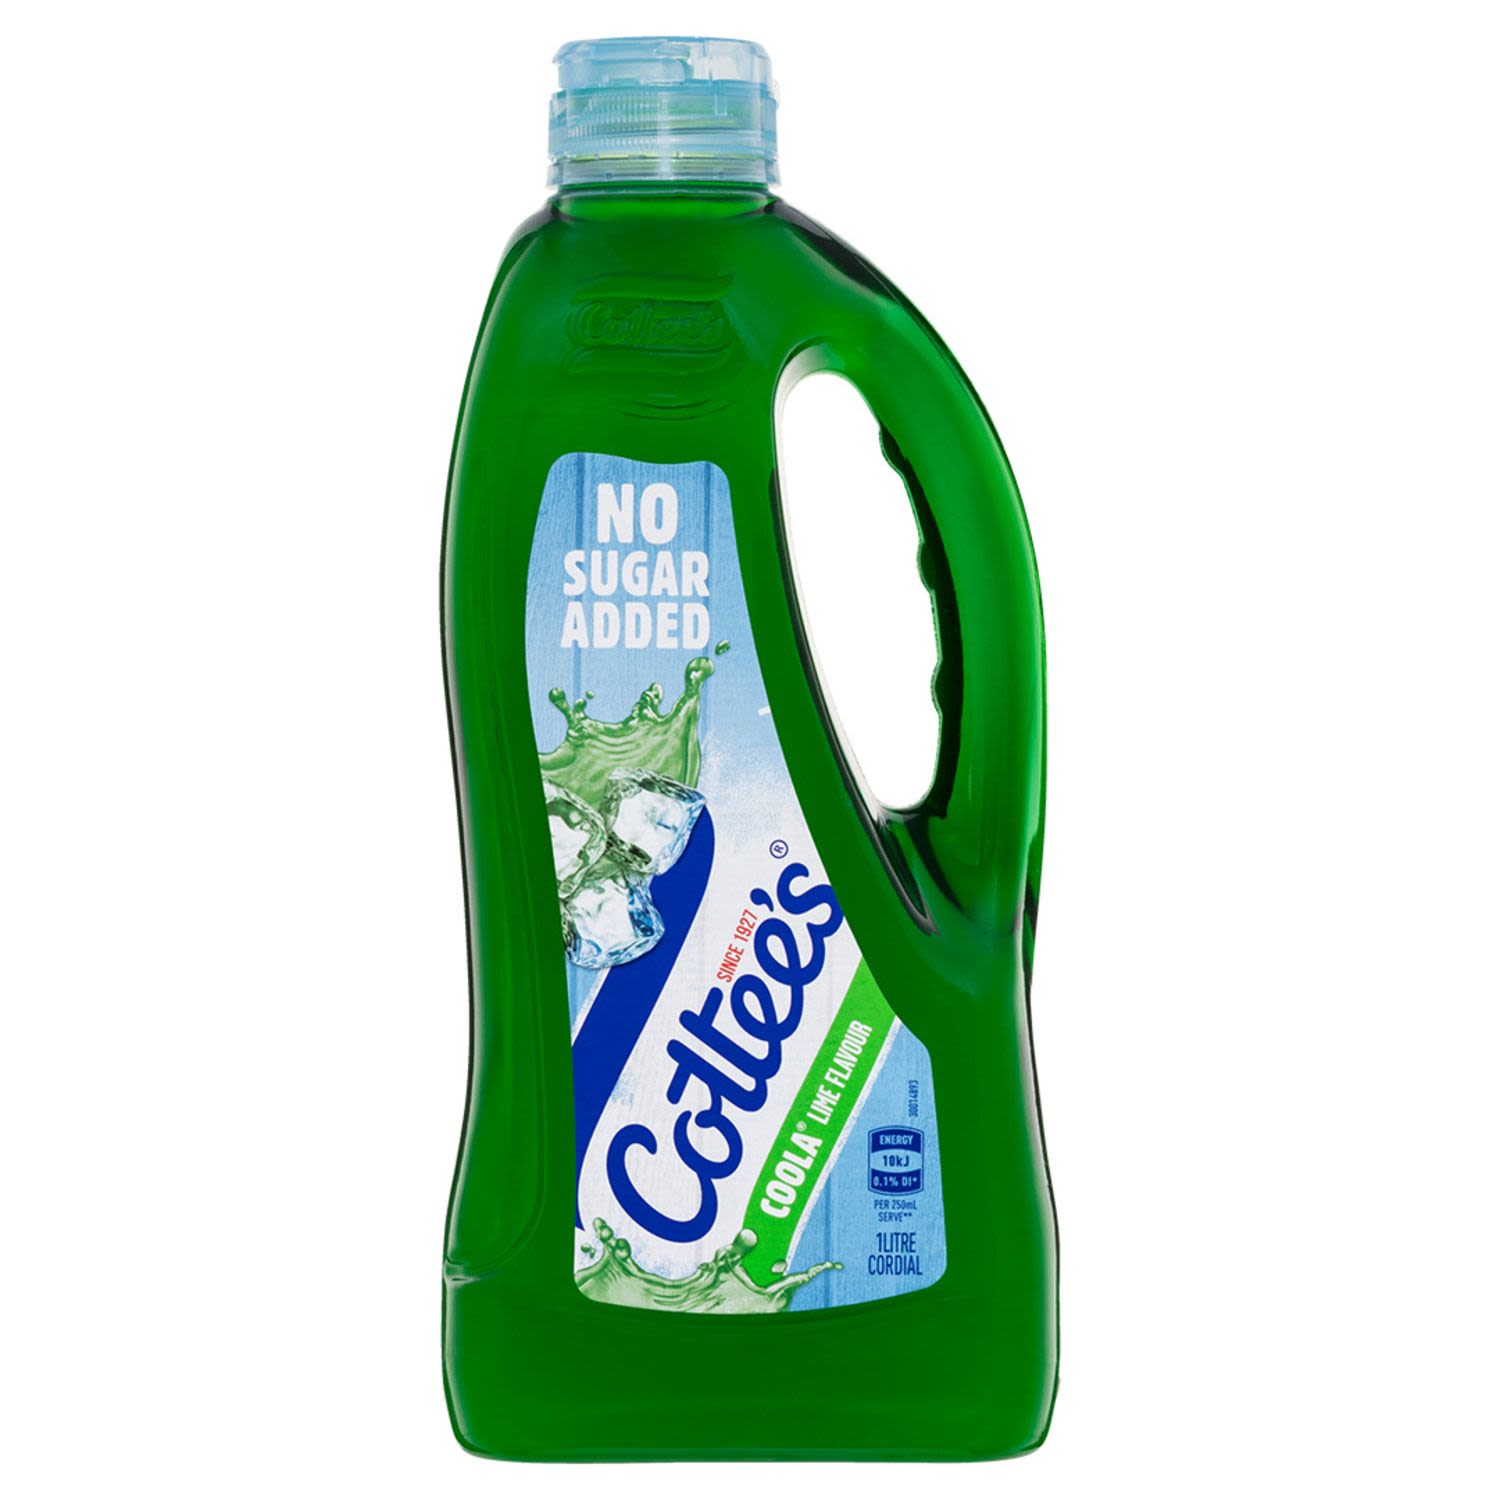 Cottee's Cordial Coola Lime Flavour No Added Sugar, 1 Litre